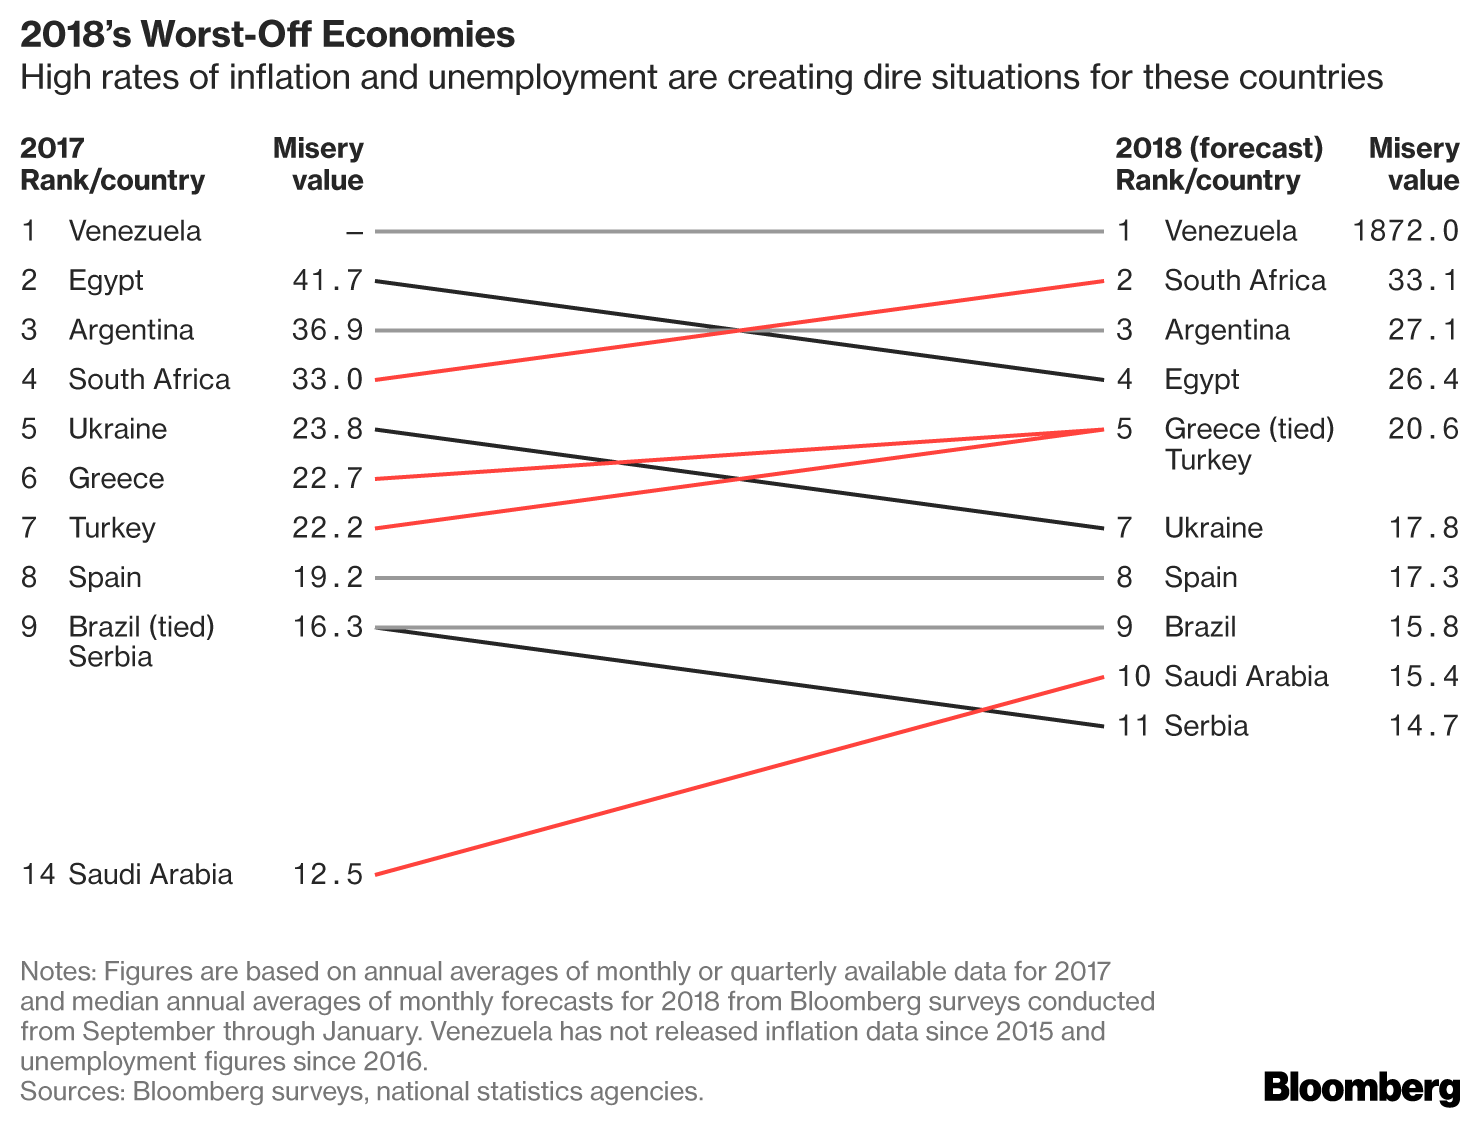 greece-among-most-miserable-economies-according-to-bloomberg-index1